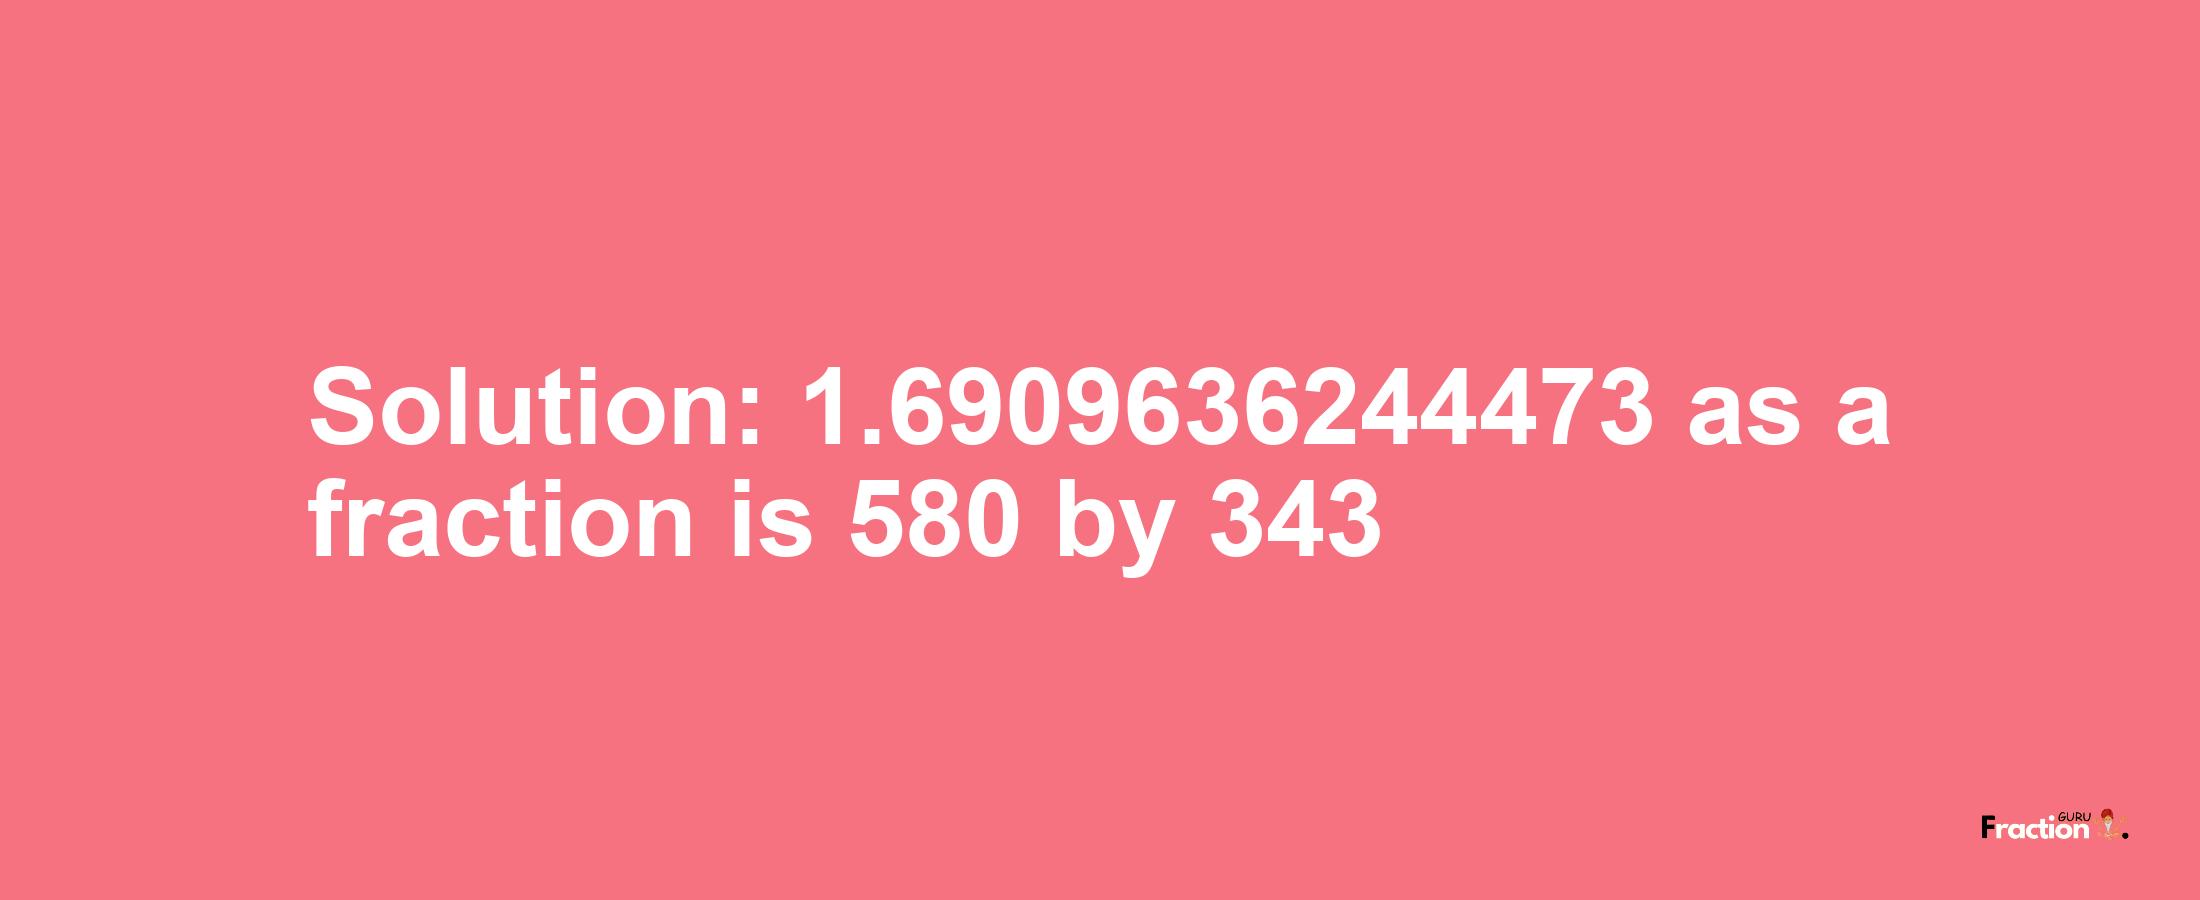 Solution:1.6909636244473 as a fraction is 580/343